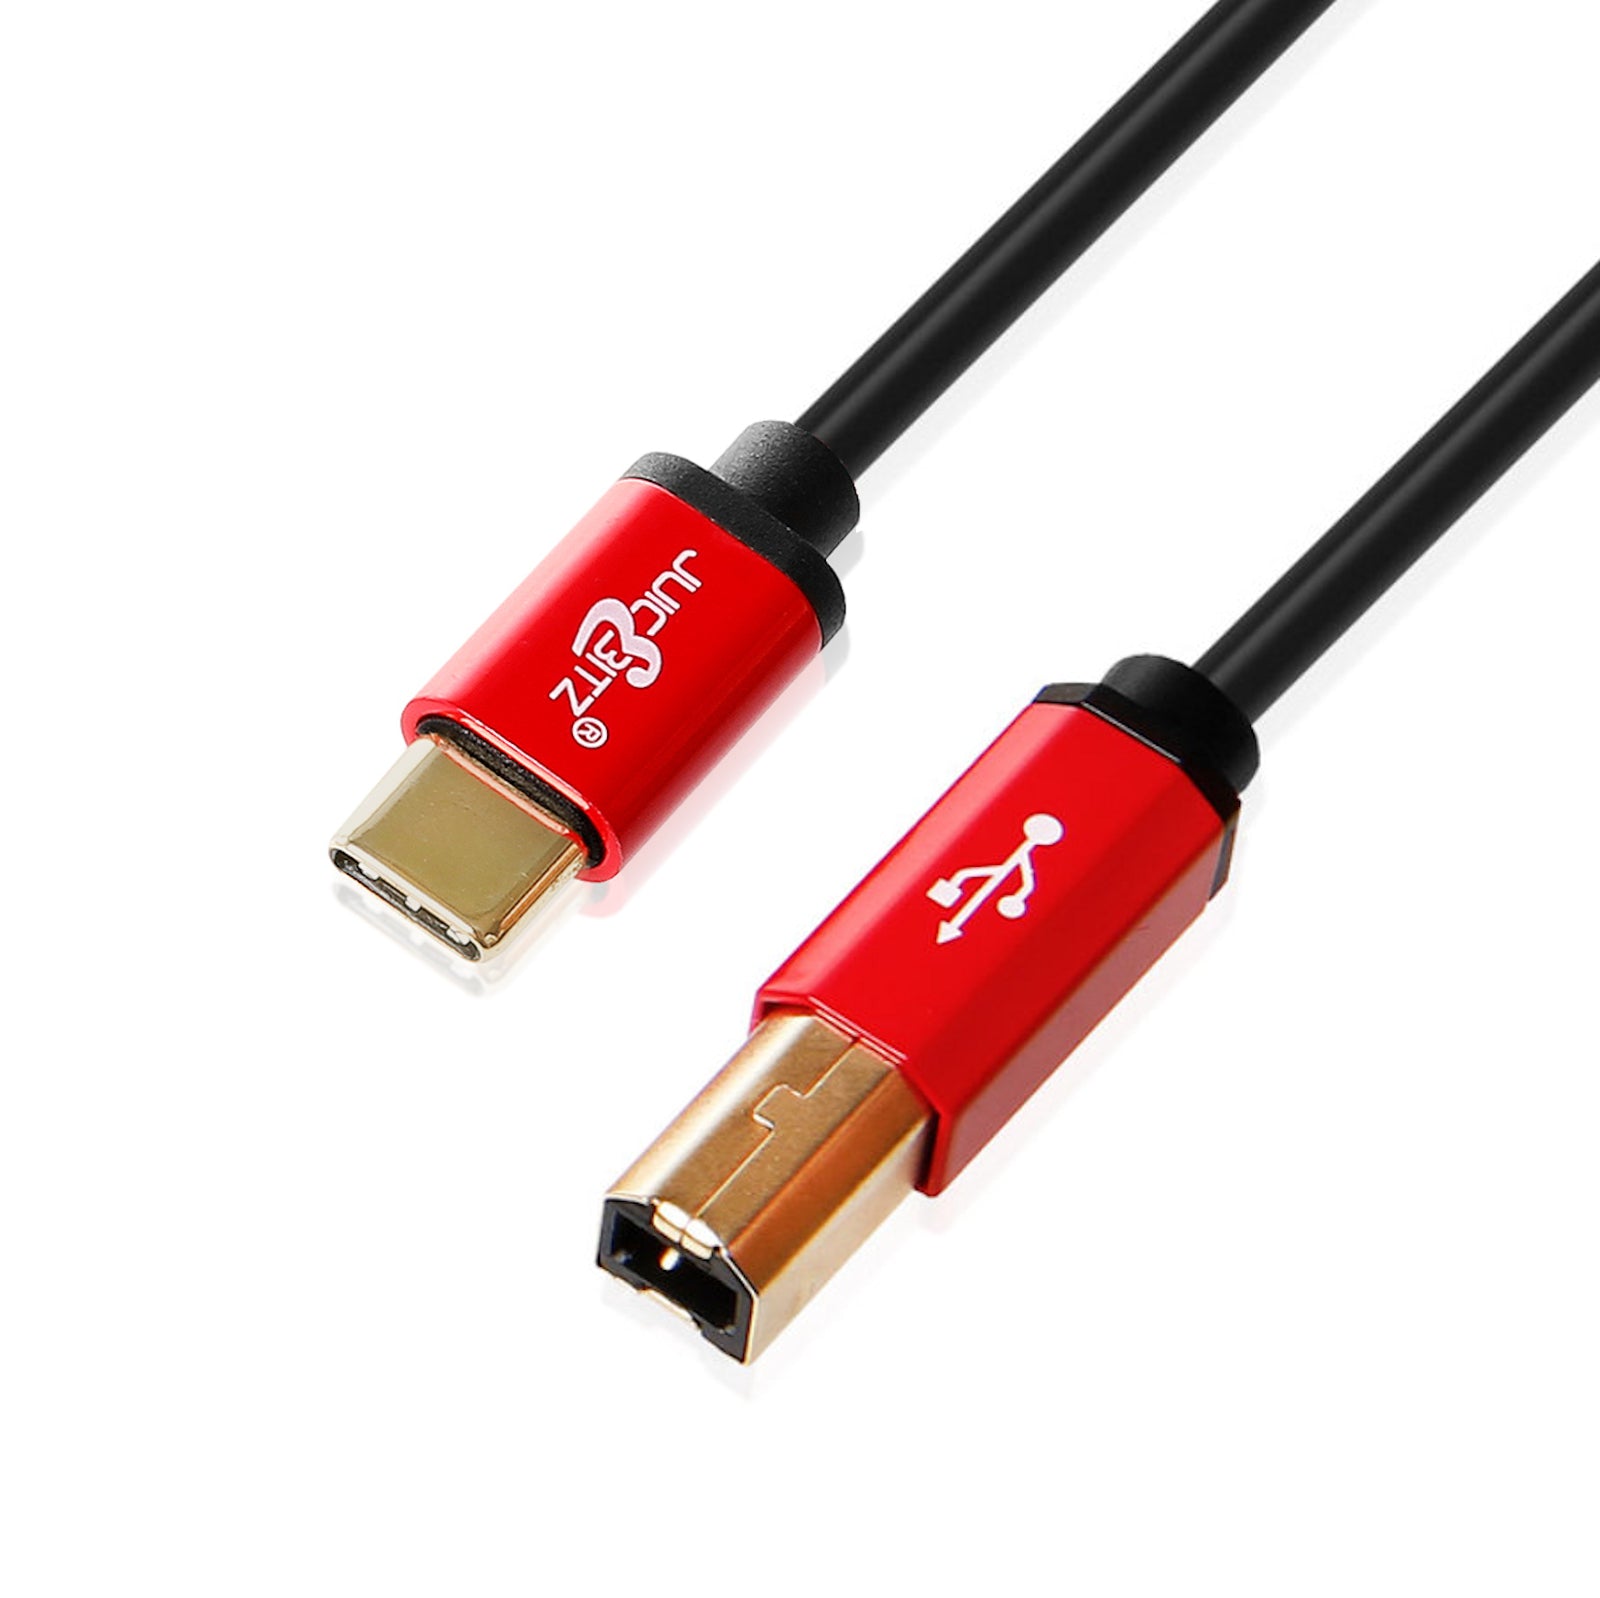 Printer Cable USB C to USB B 2m USB 3.0 - USB-C Cables, Cables